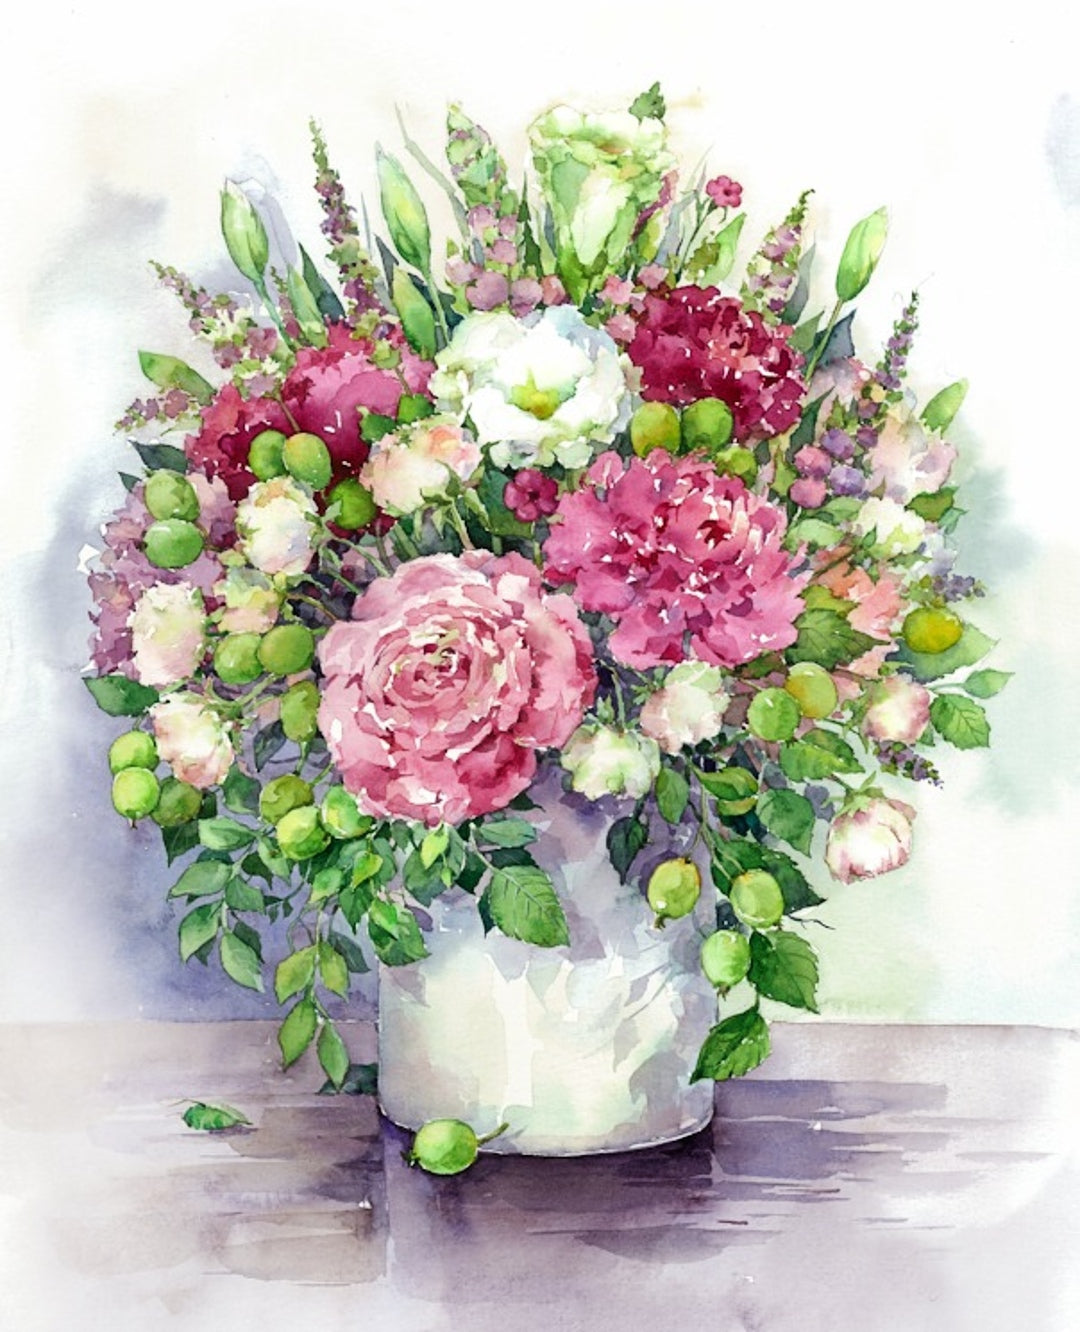 LG025e - Bright peonies with green fruits in a white vase